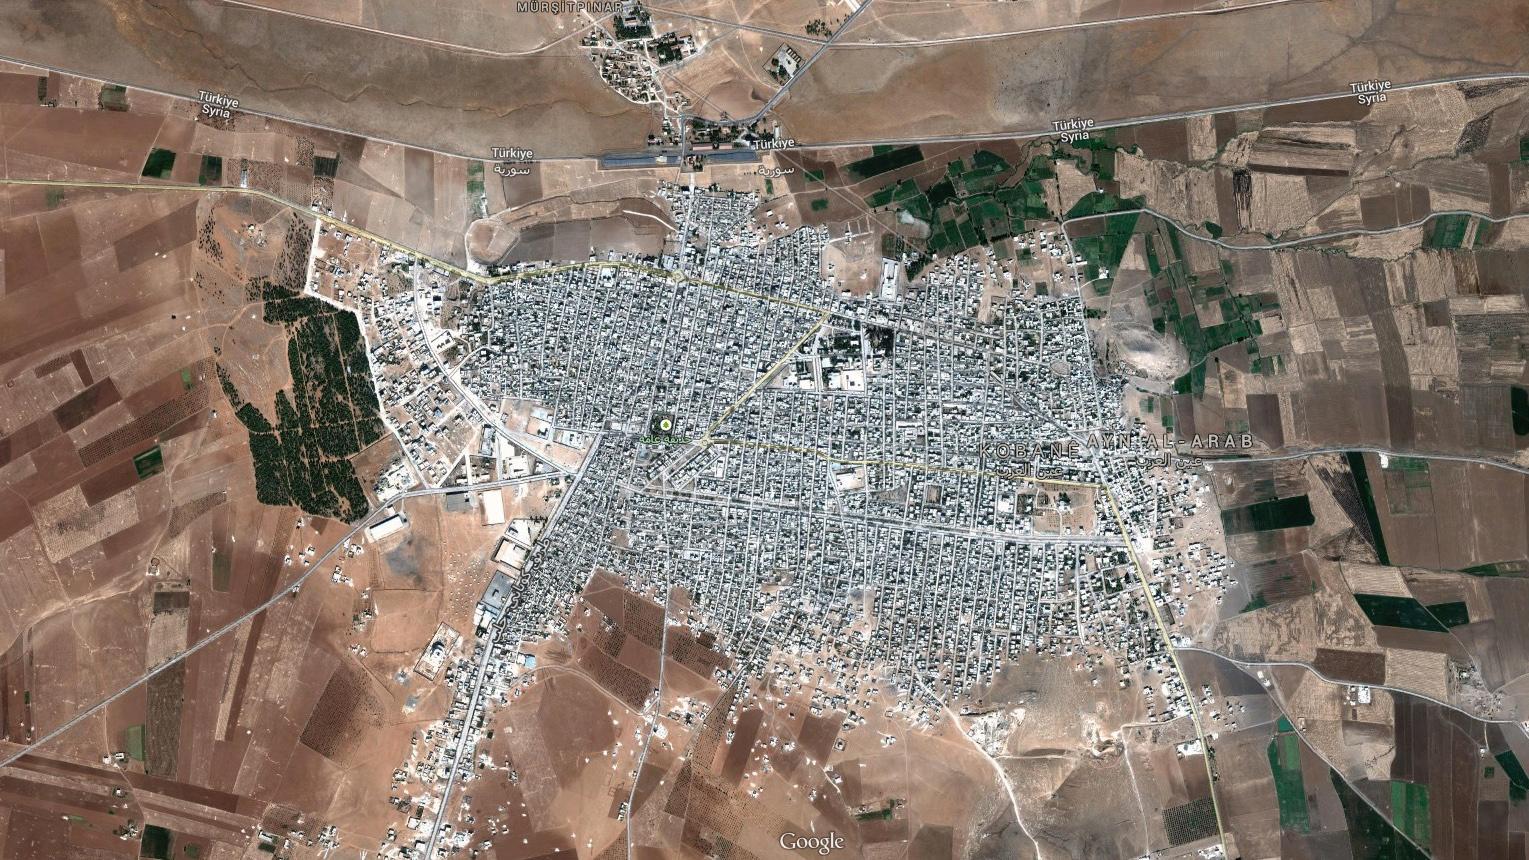 Kobane sits right on the border with Turkey